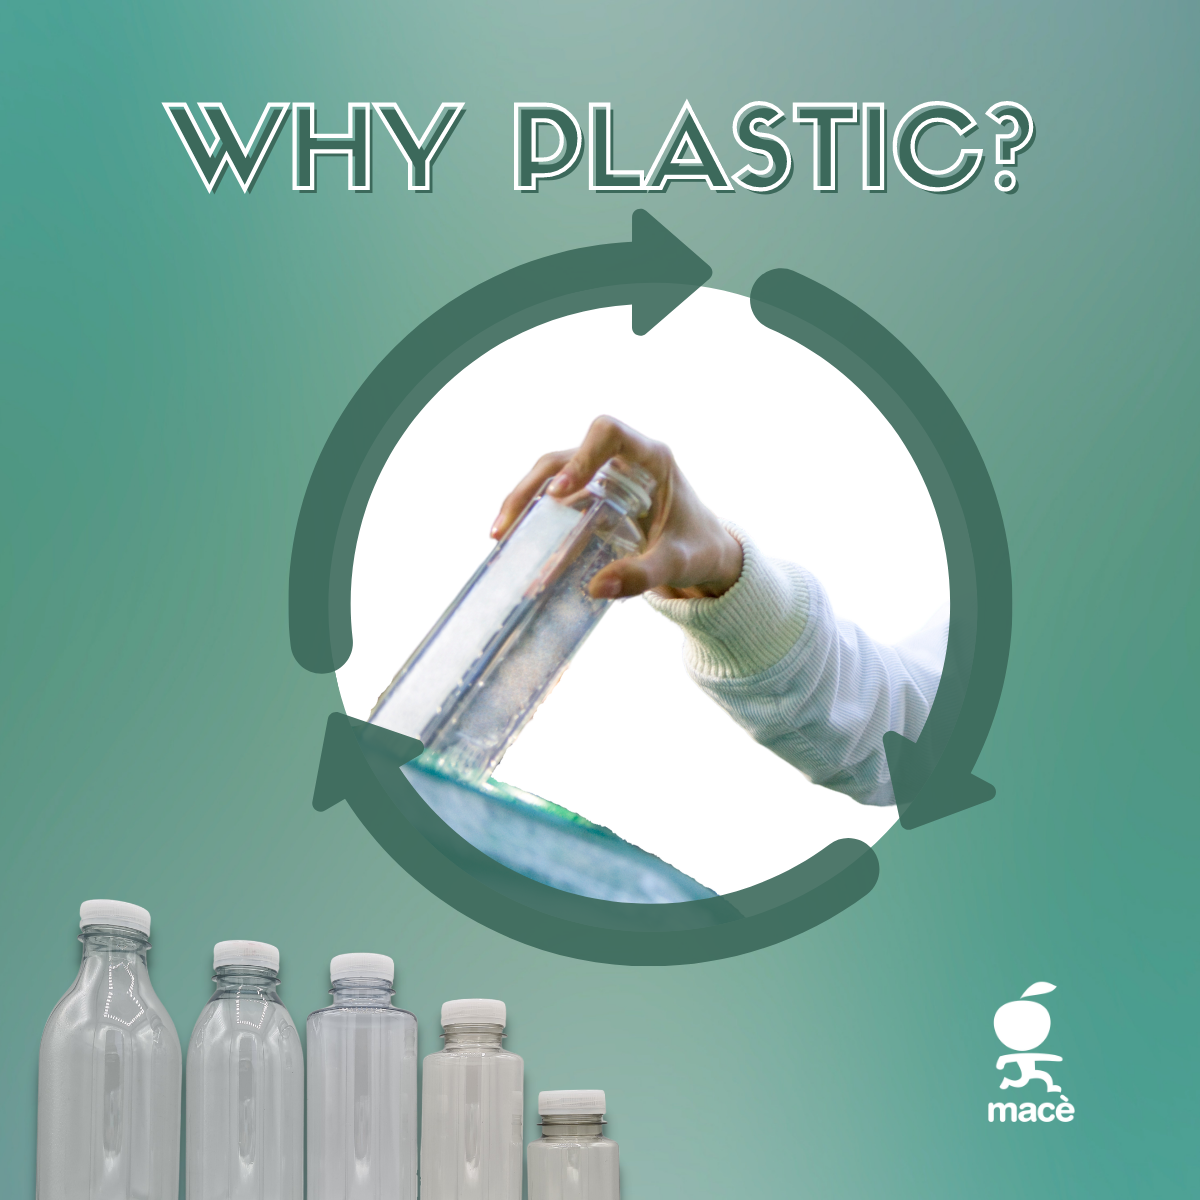 WHY DO WE USE PLASTIC?